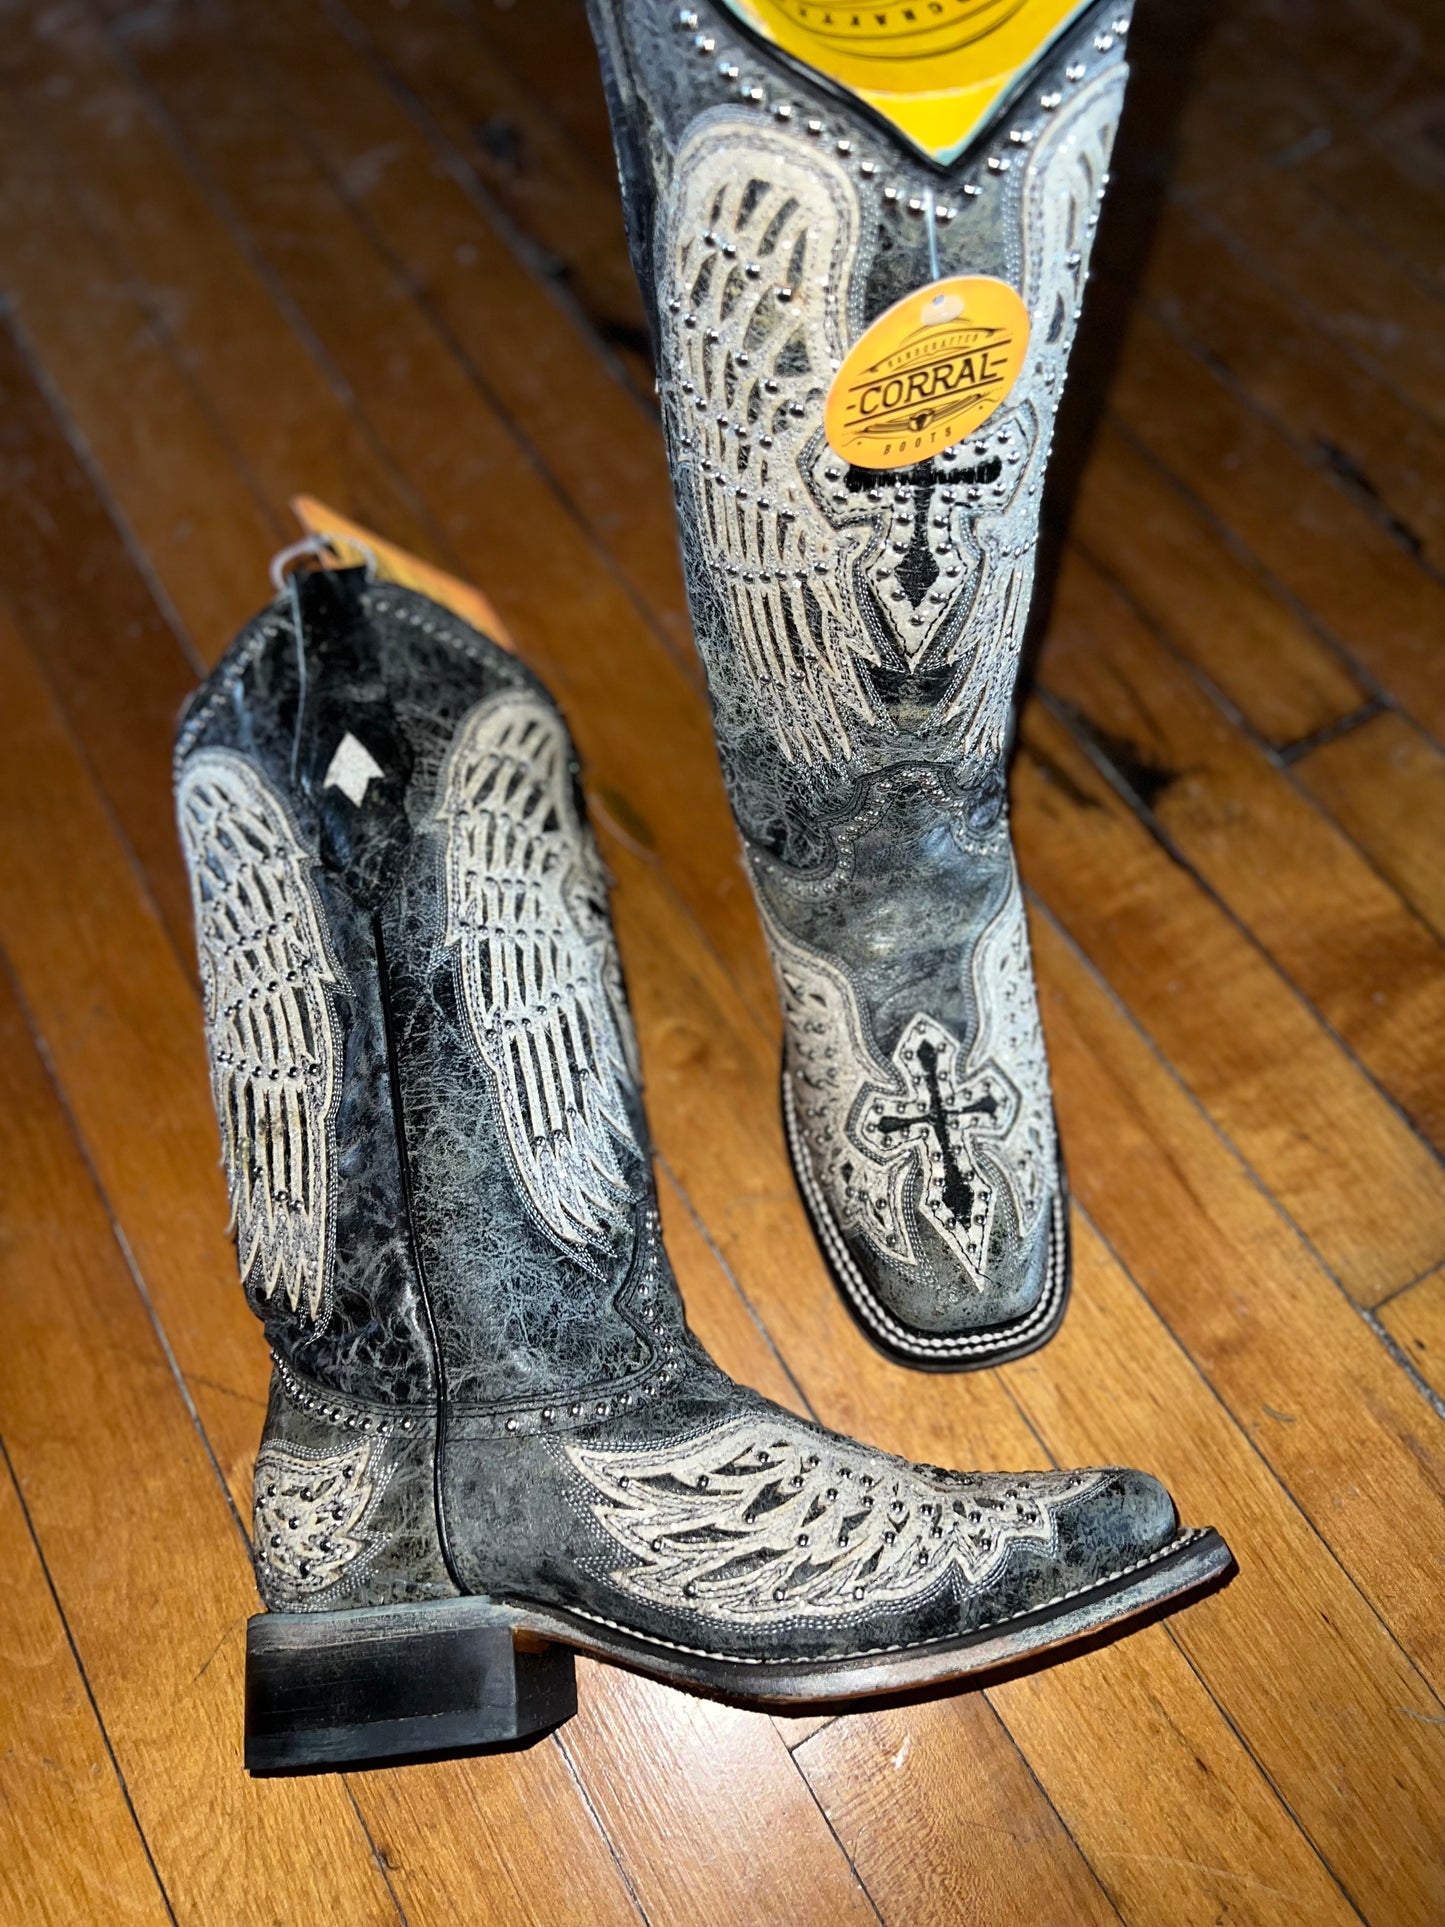 The Chelsey Corral Boots